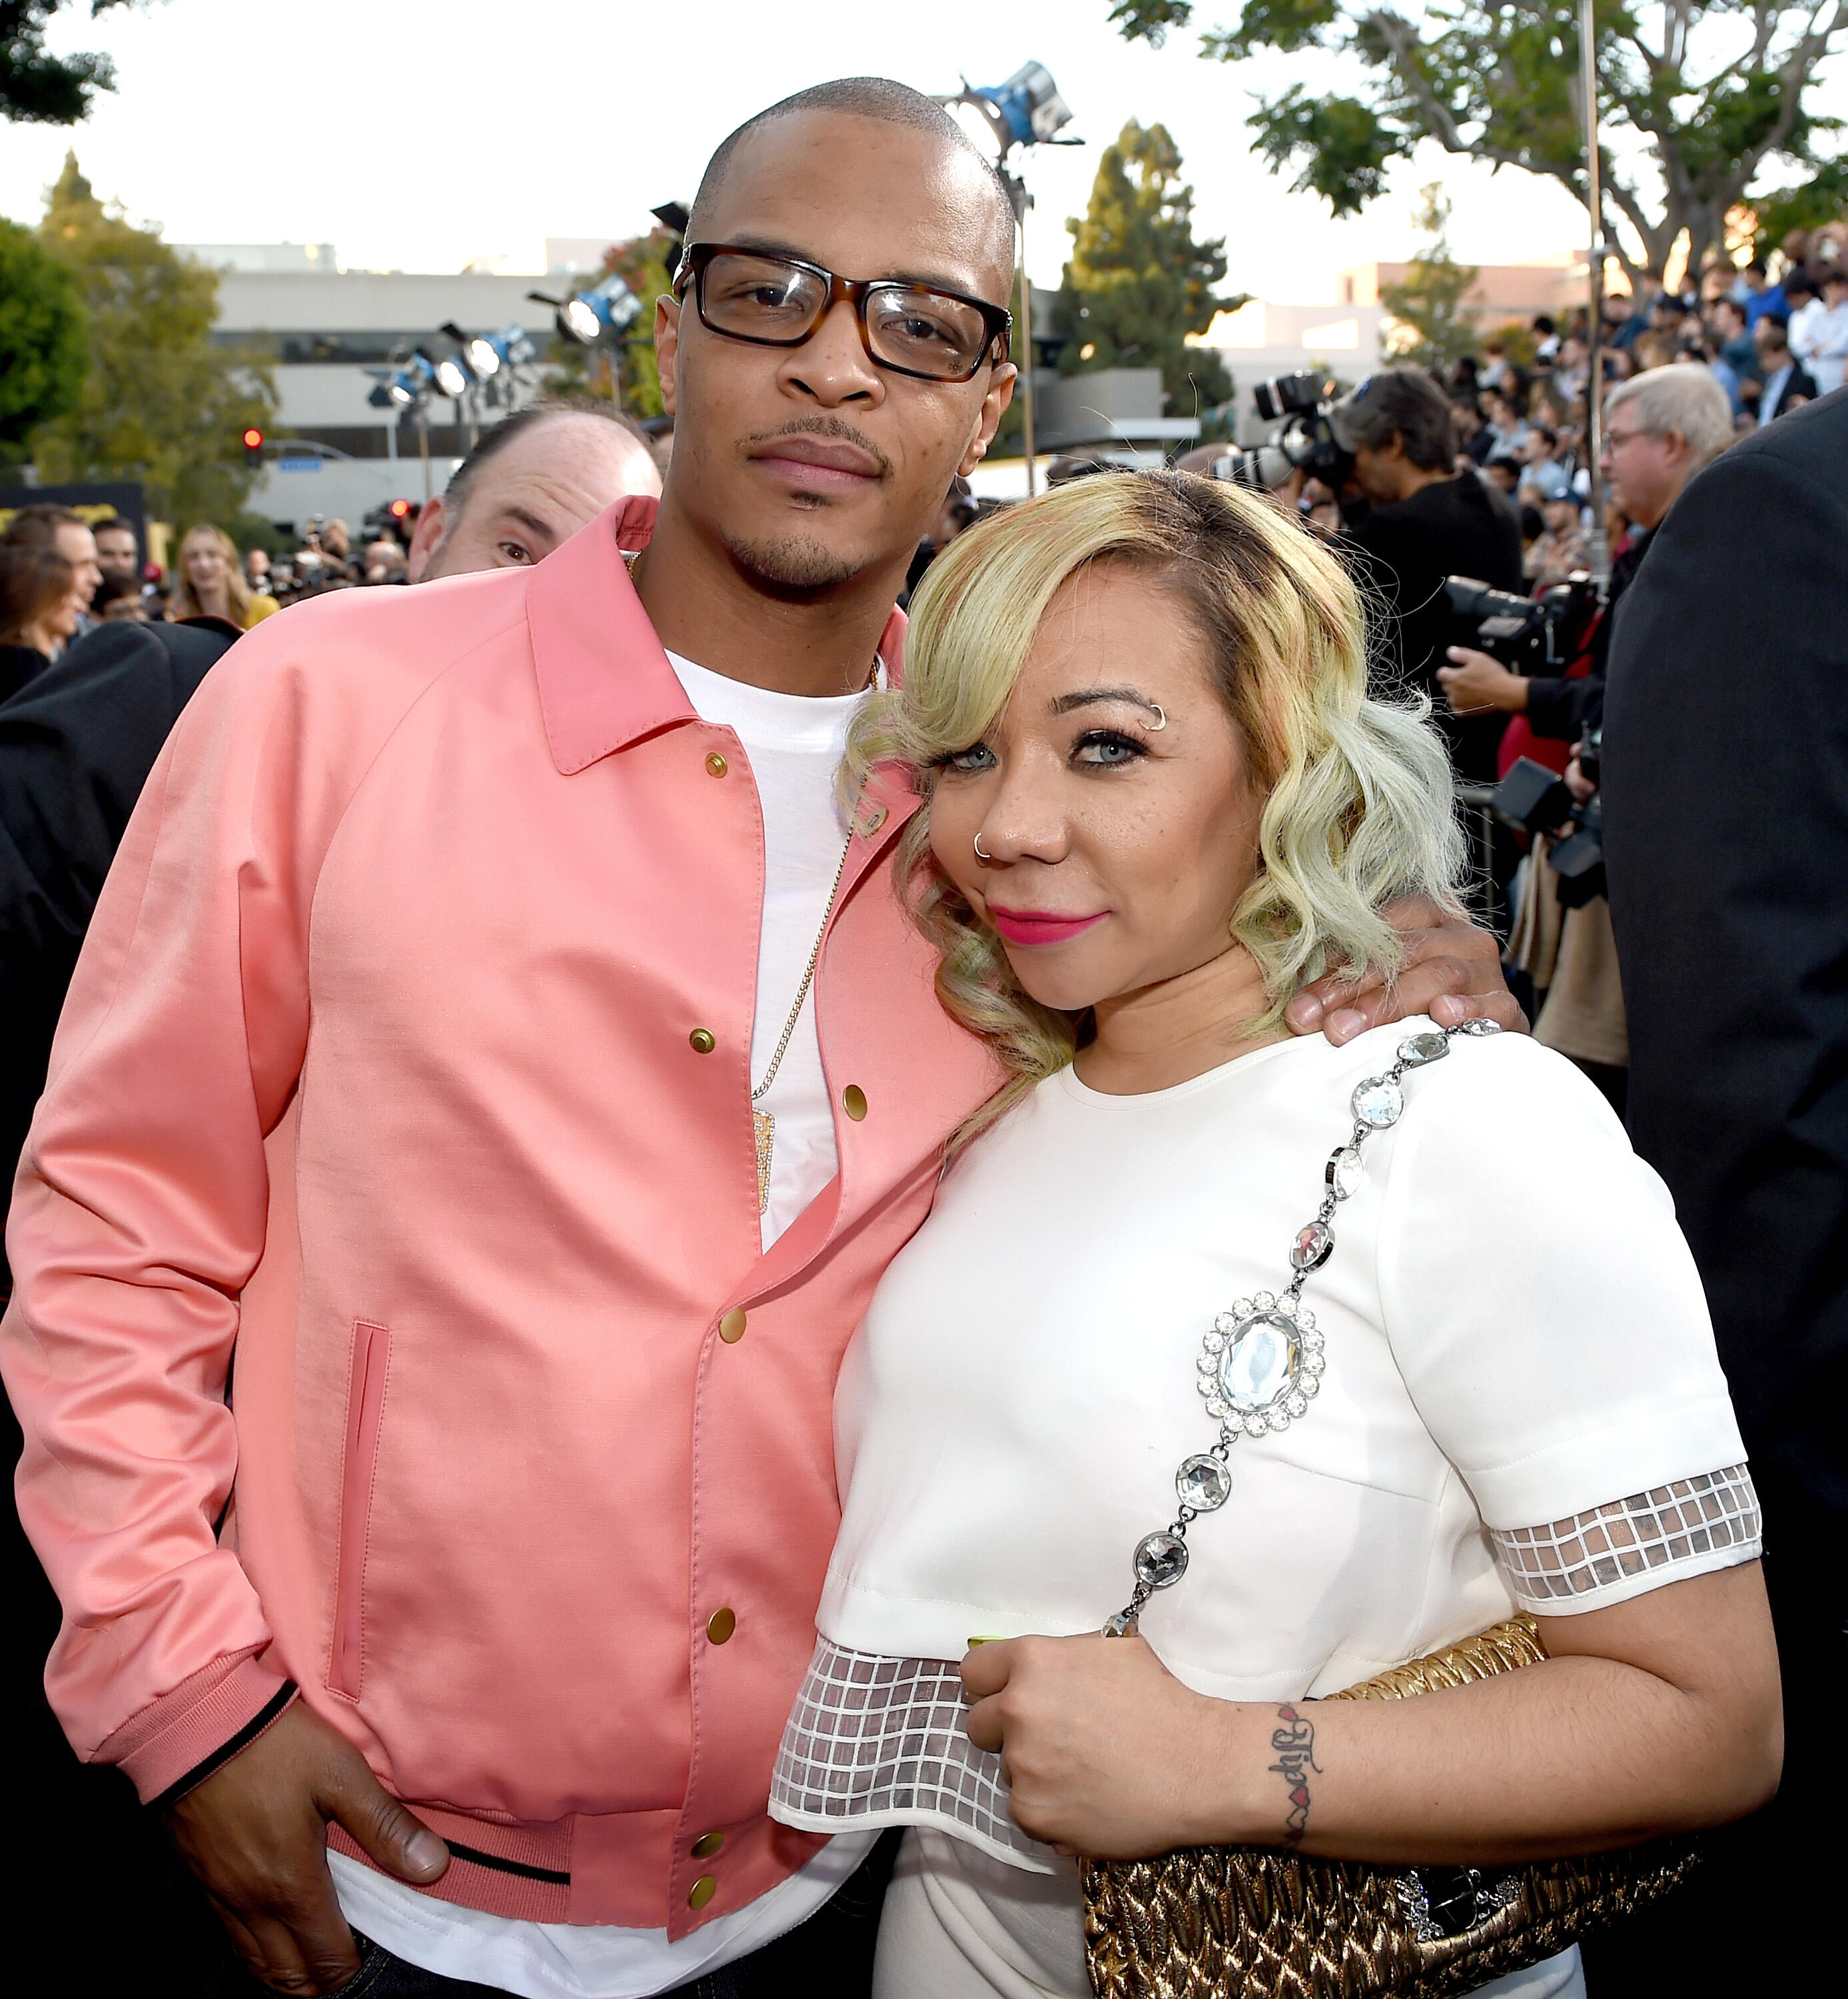 Did This Just Confirm The Rumors That T.I. & Tiny Have Threesomes?! - Thumbnail Image